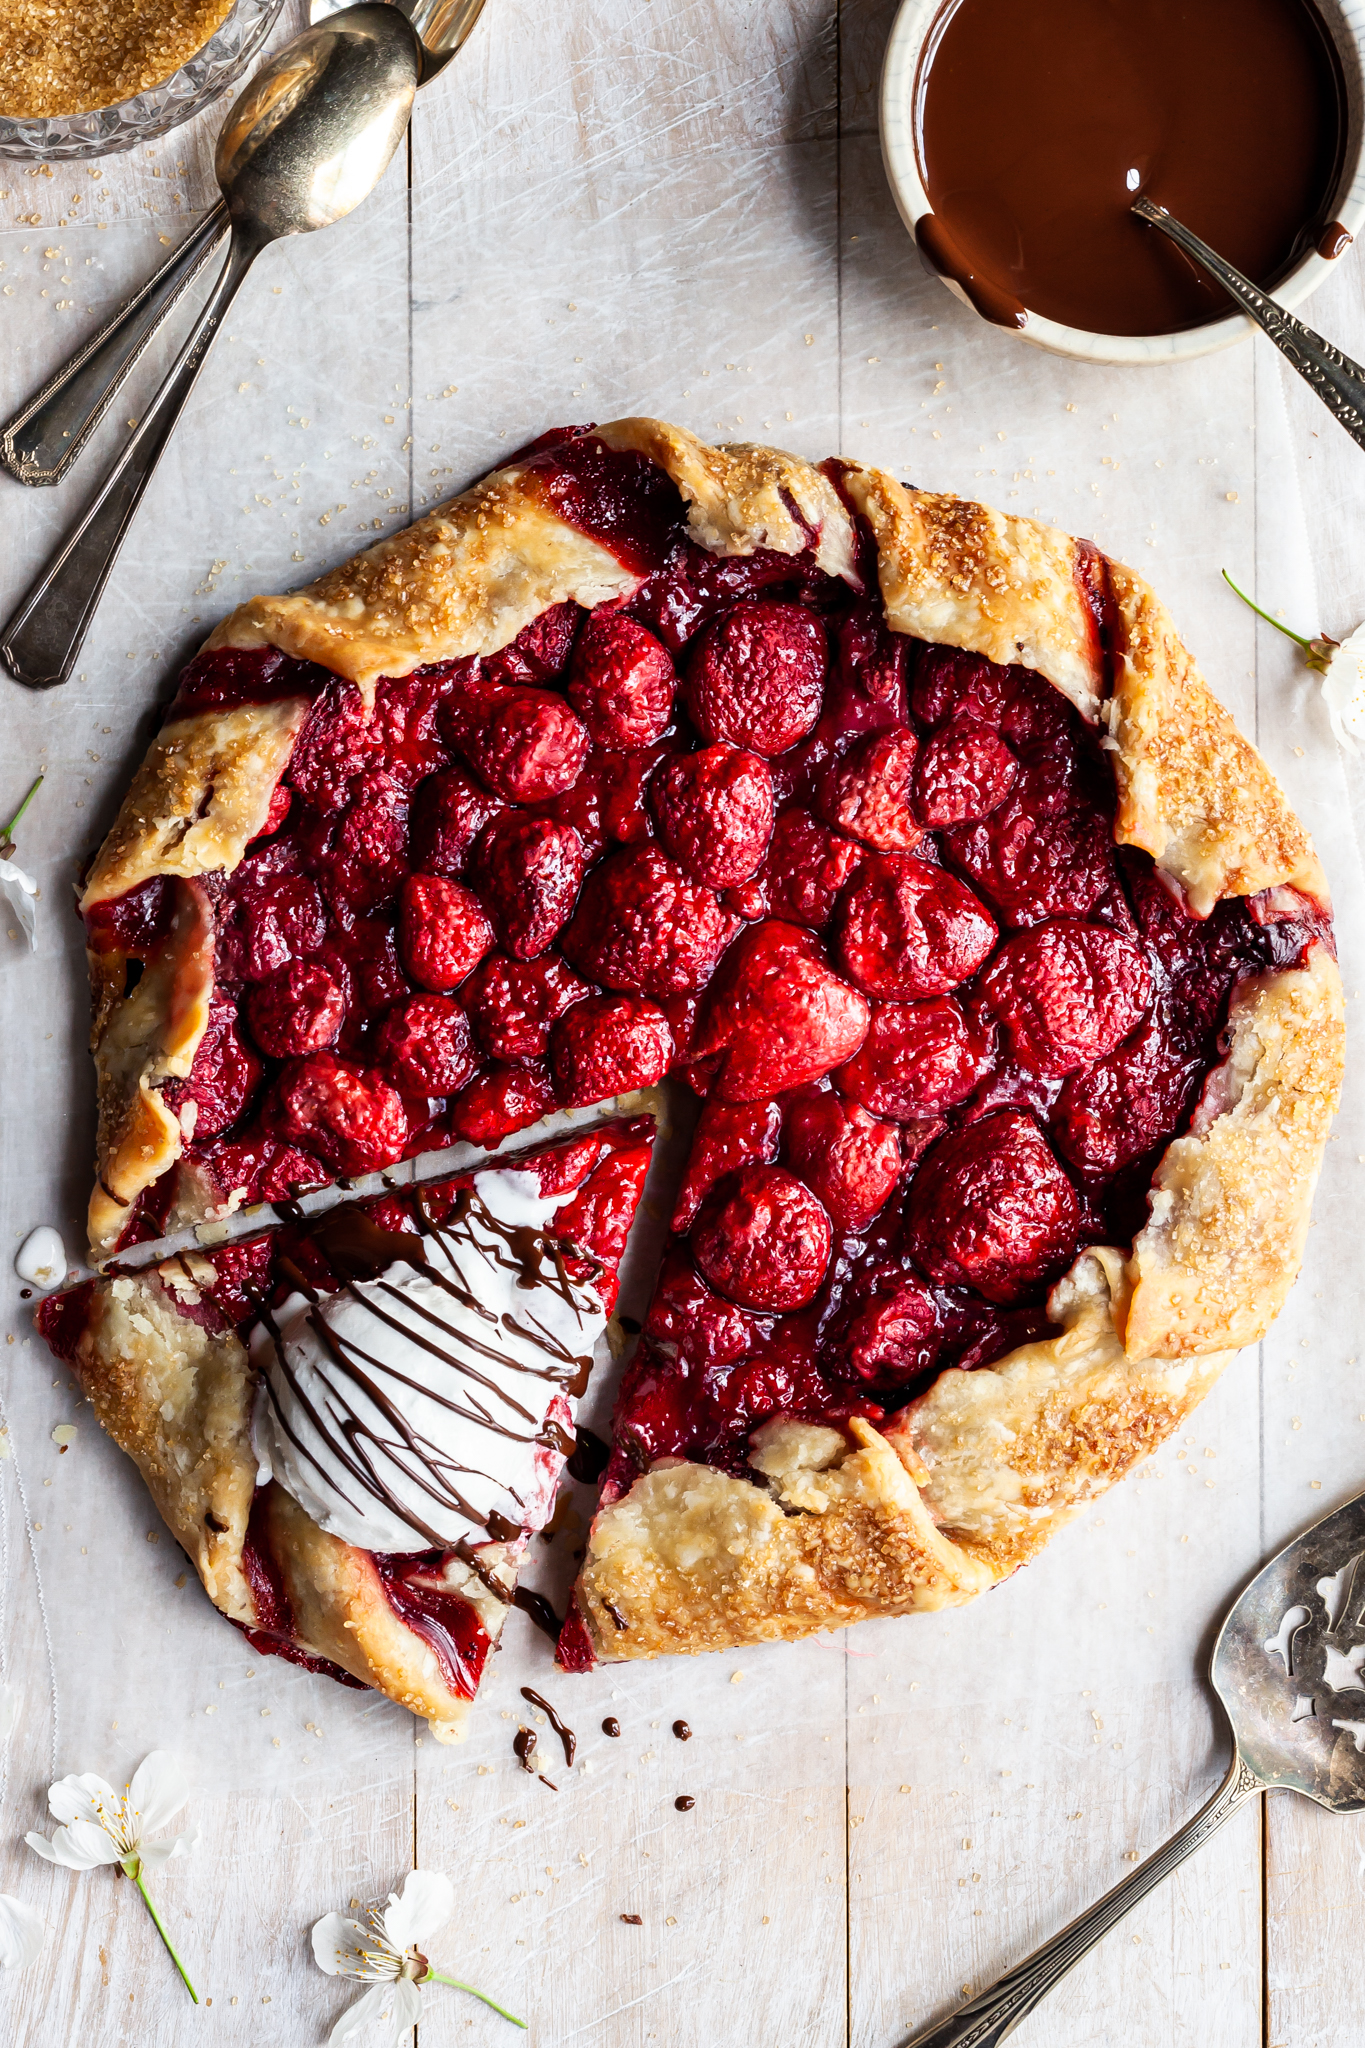 Strawberry galette with ice cream on the one slice which has been cut